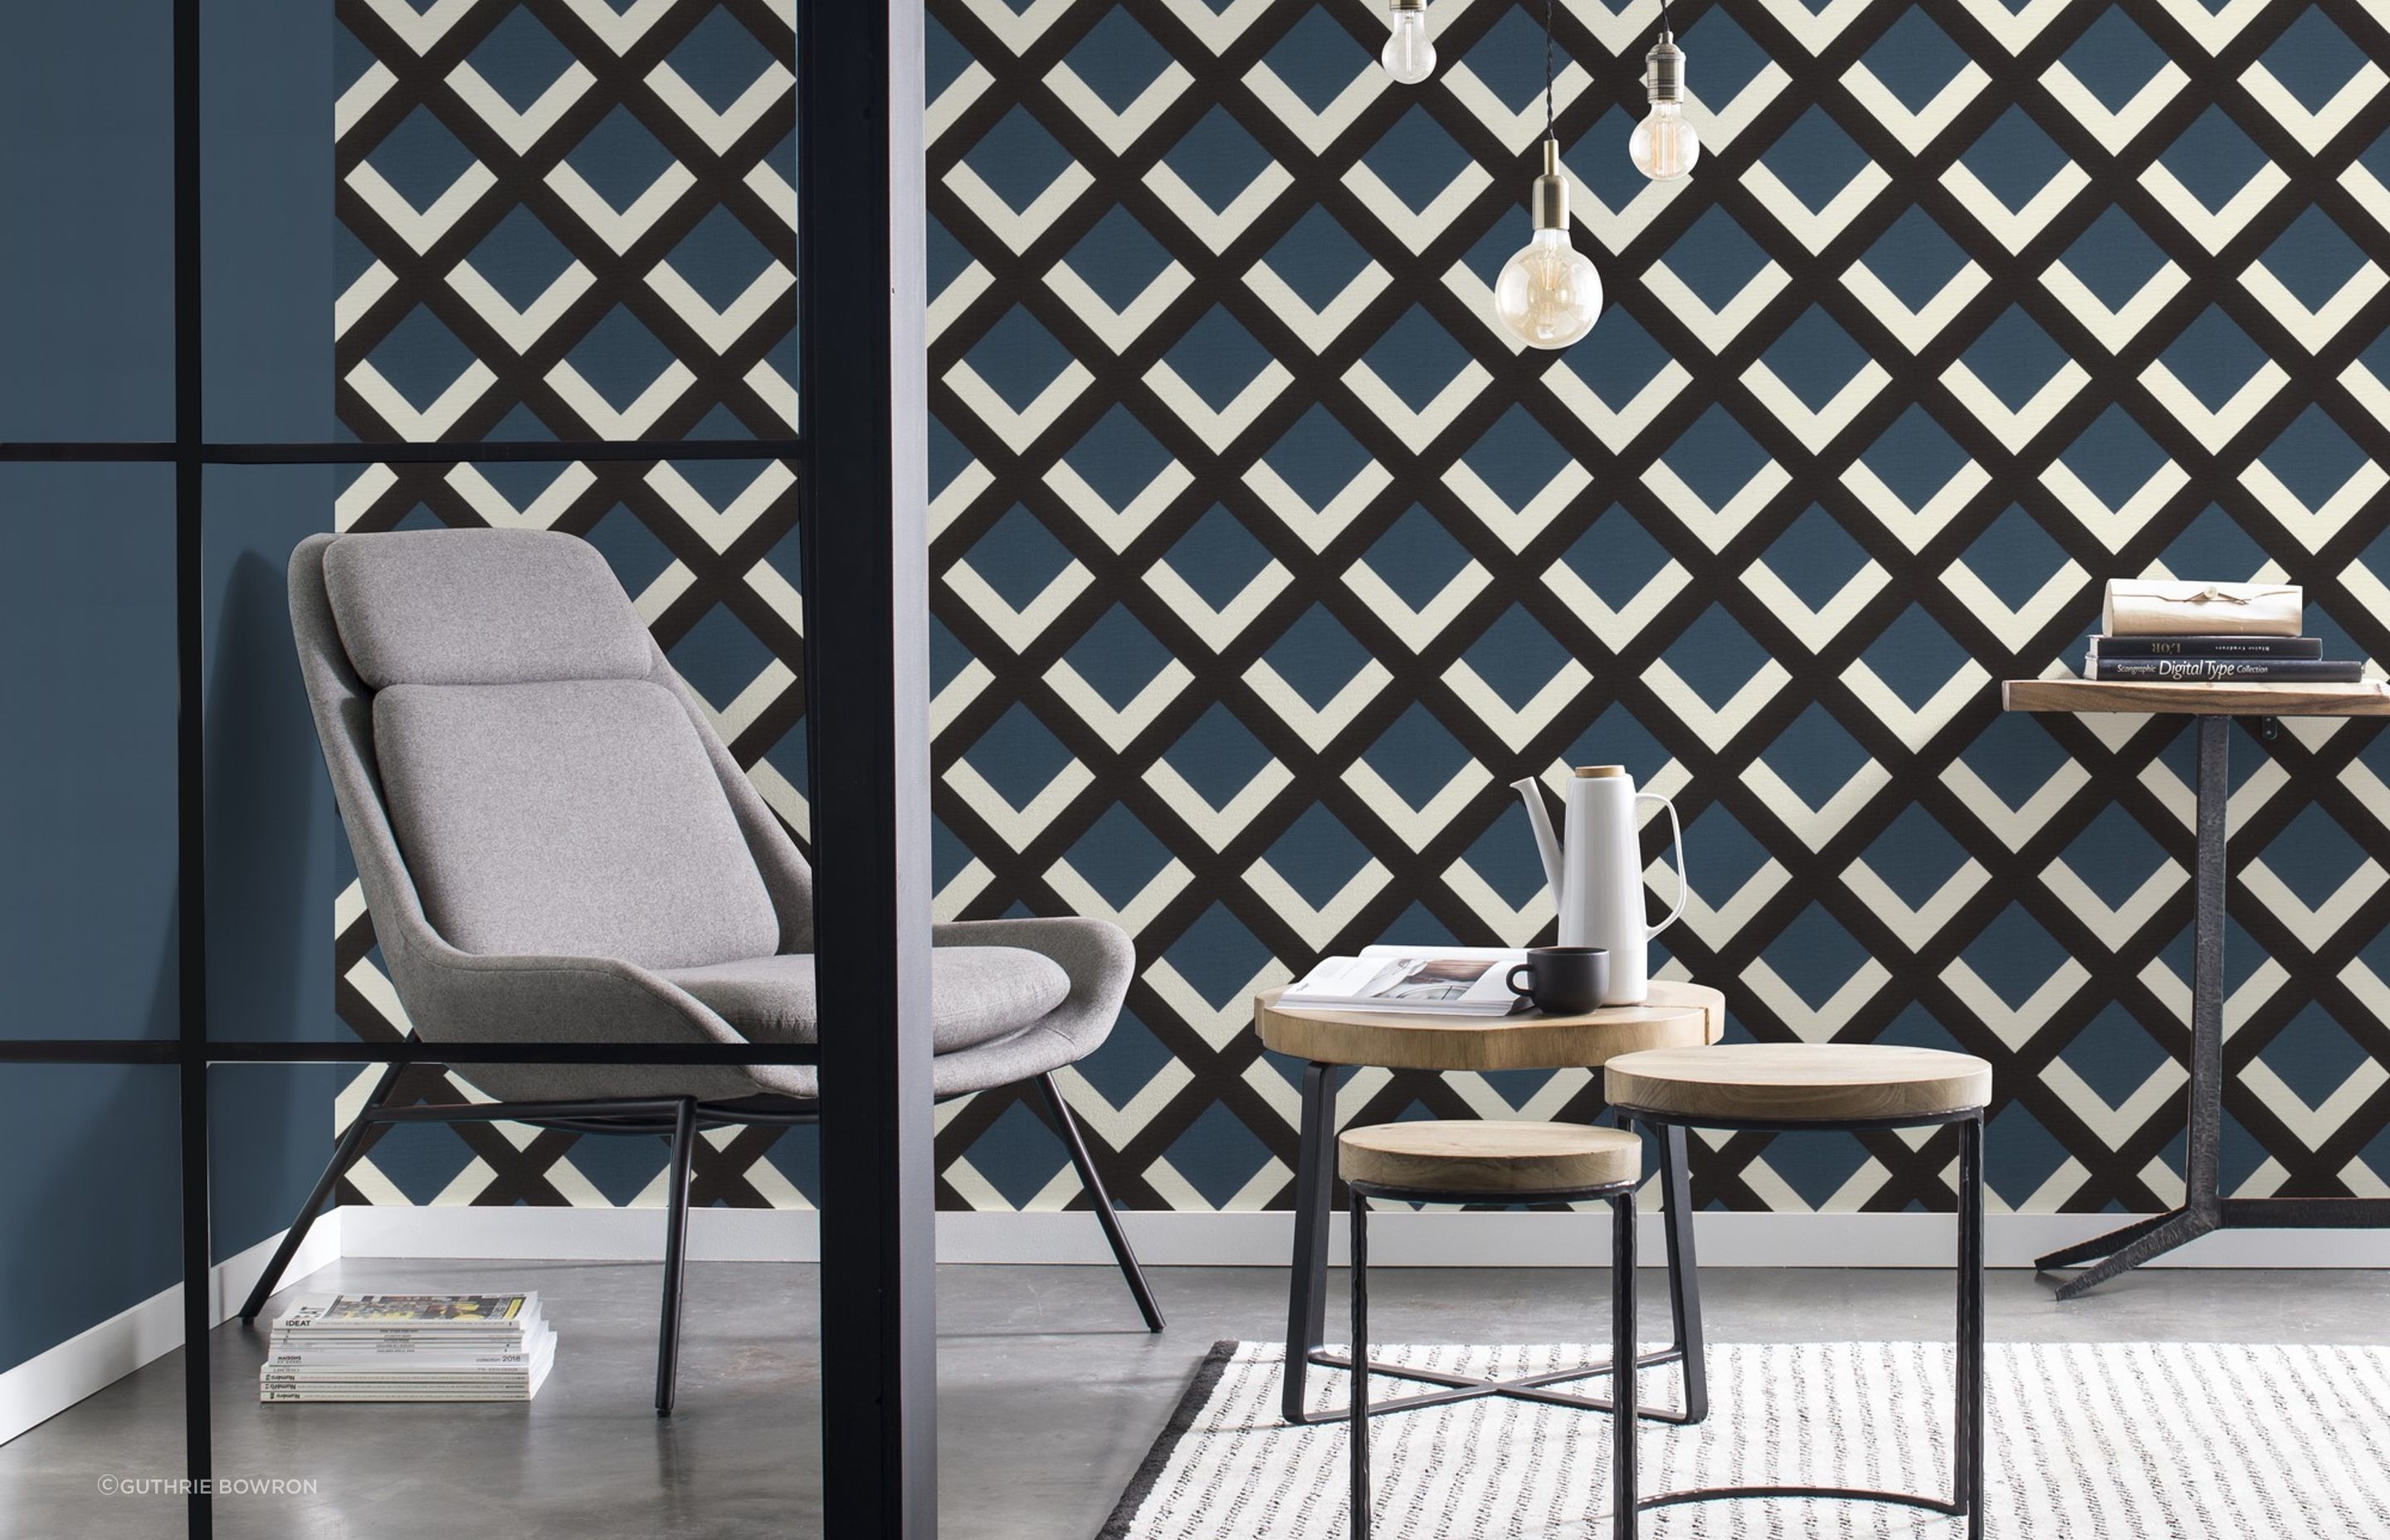 The geometric pattern of this edgy wallpaper from the Denzo II Collection gives modern vibes to this contemporary space.